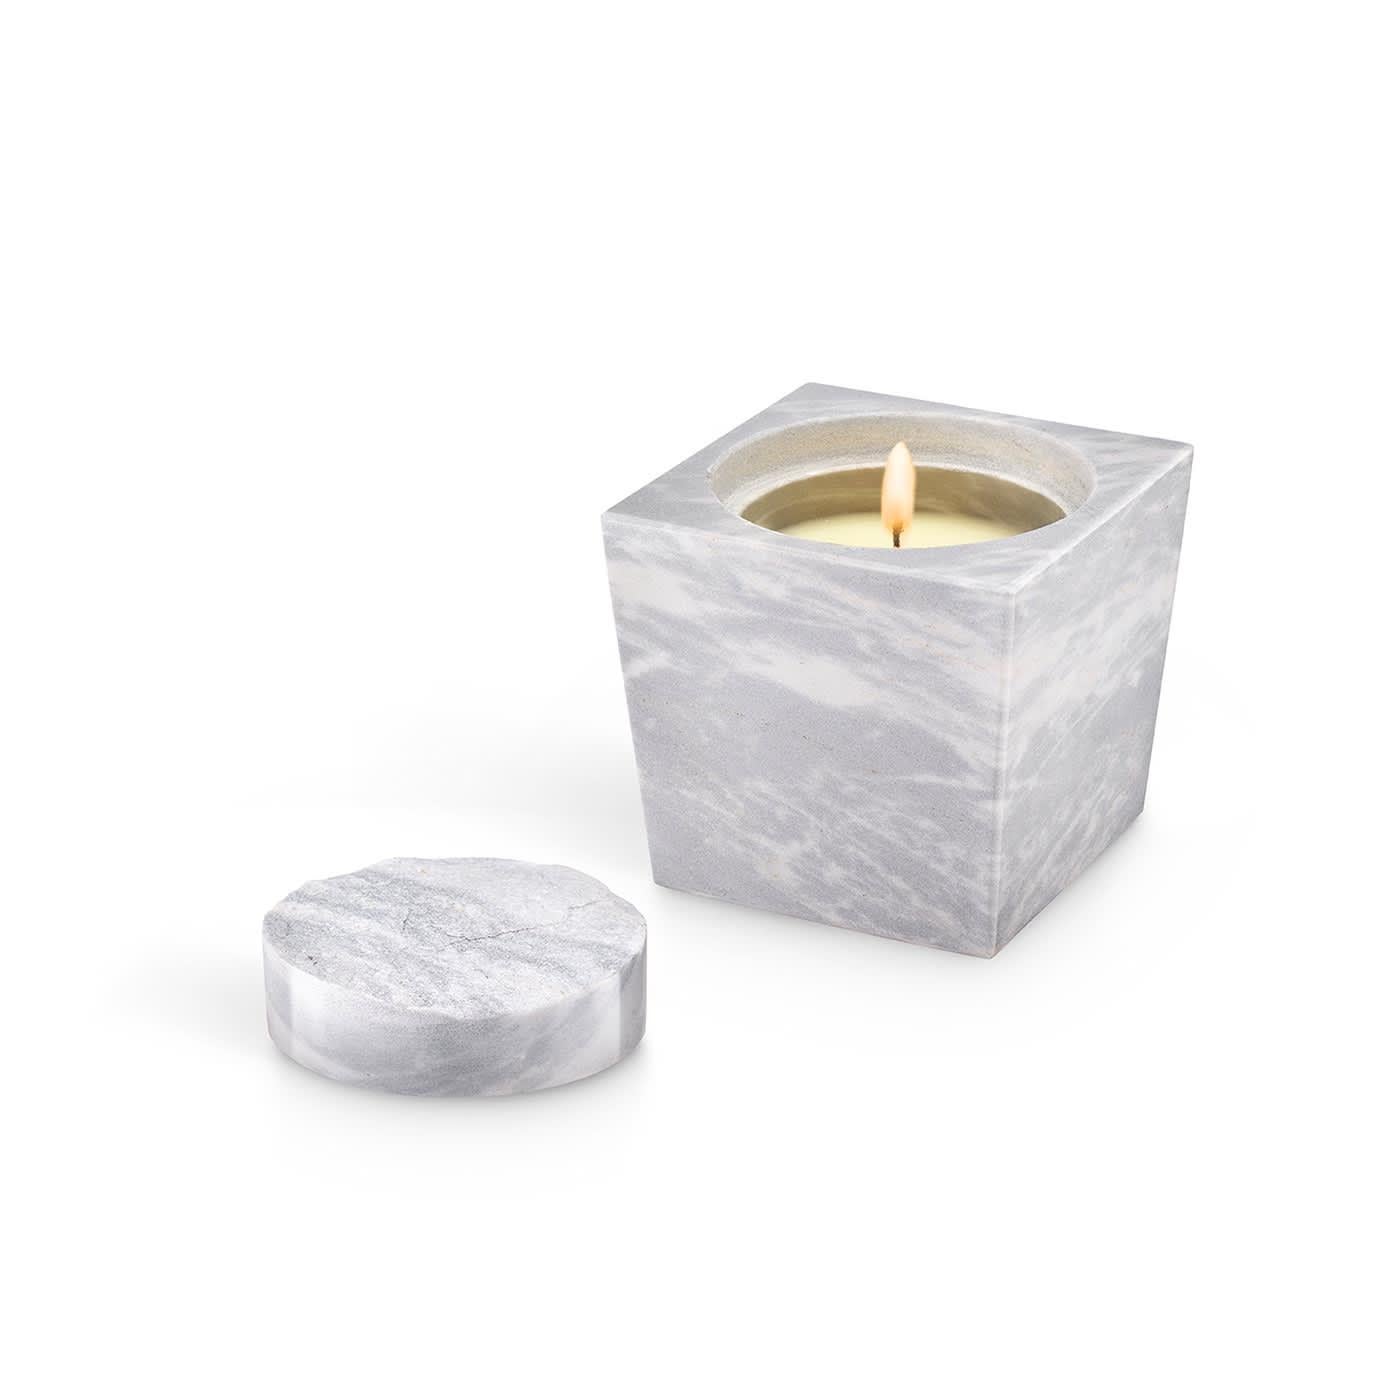 Elegant, timeless marble candle, the wayward Roman goddess of beauty and eros. Palissandro Reale or marble metamorphic rock, with marked and heterogeneous veins of white, delicate blue. The uniqueness of the minerals creates shining, surprising,